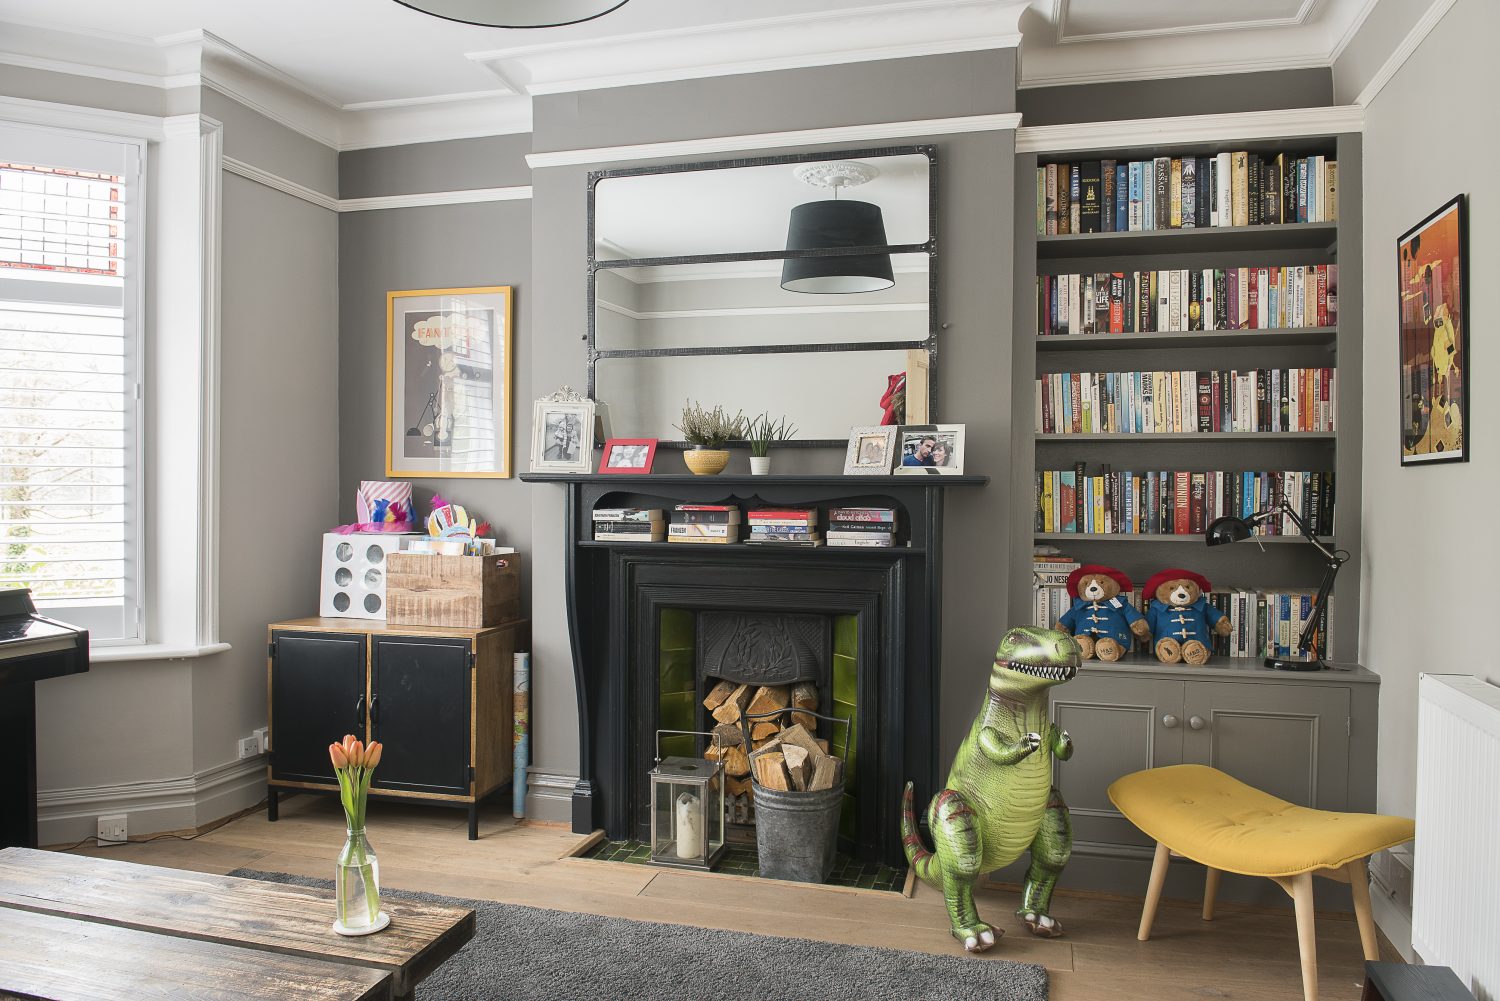 Caroline initially intended on turning the playroom at the front of the house into a snug. The walls are painted in Pavilion Gray and Mole’s Breath by Farrow & Ball and prints on the wall were found at Battersea Affordable Art Fair